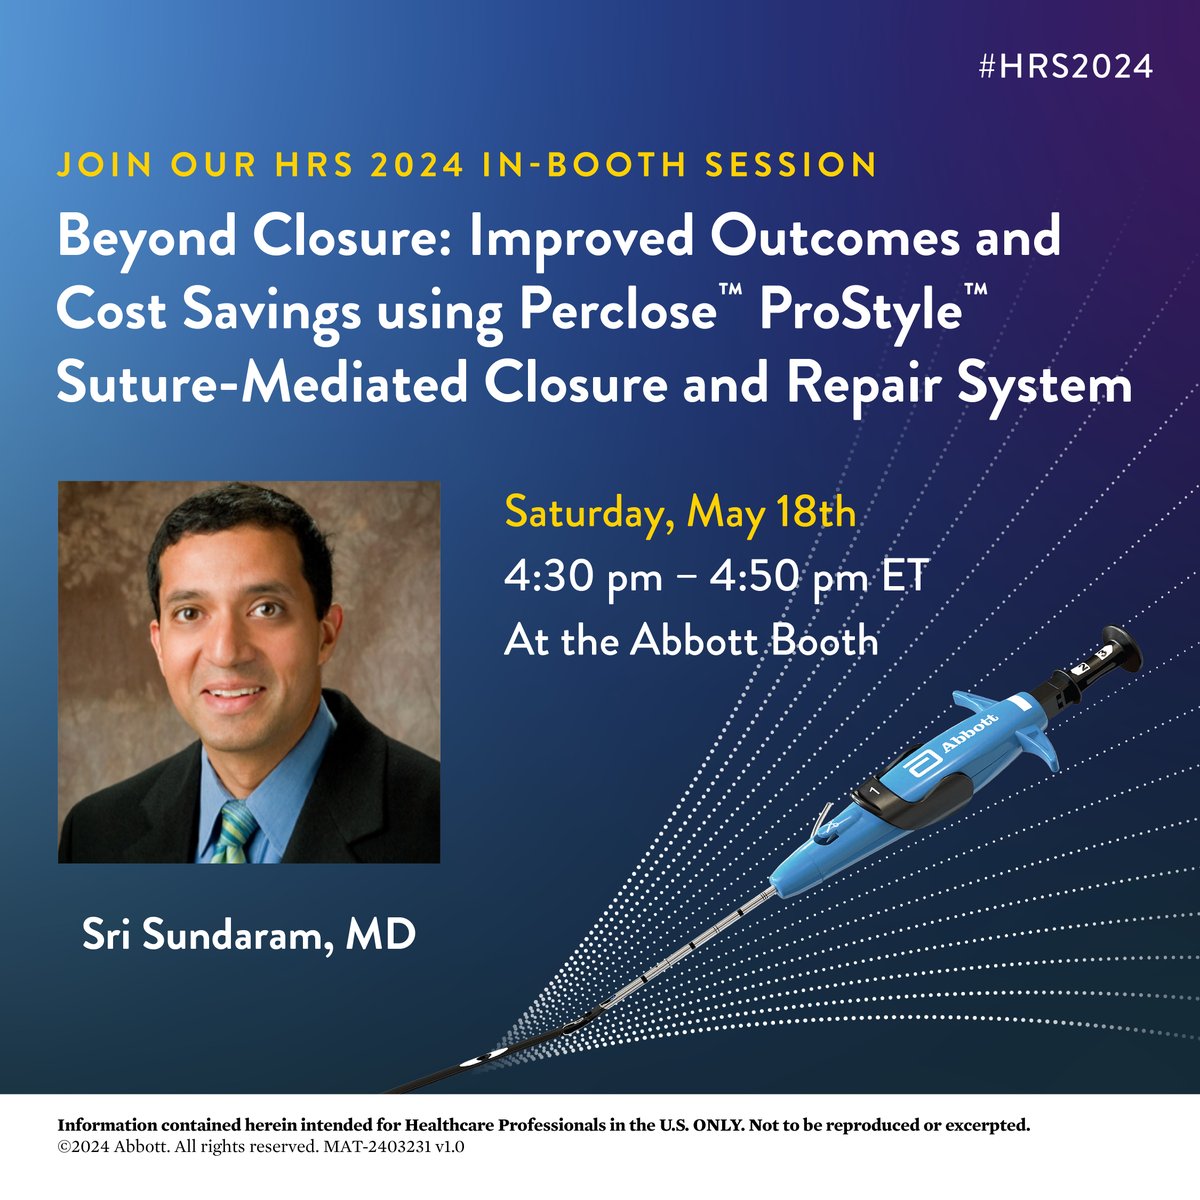 📱Calling all #EPeeps heading to #HRS2024! Meet @srissundaram in our booth to discover how our #Perclose ProStyle Suture-Mediated Closure and Repair System can elevate your post-cardiac #Ablation experience: bit.ly/3J0TlBJ Safety Info: bit.ly/3qGdxzE